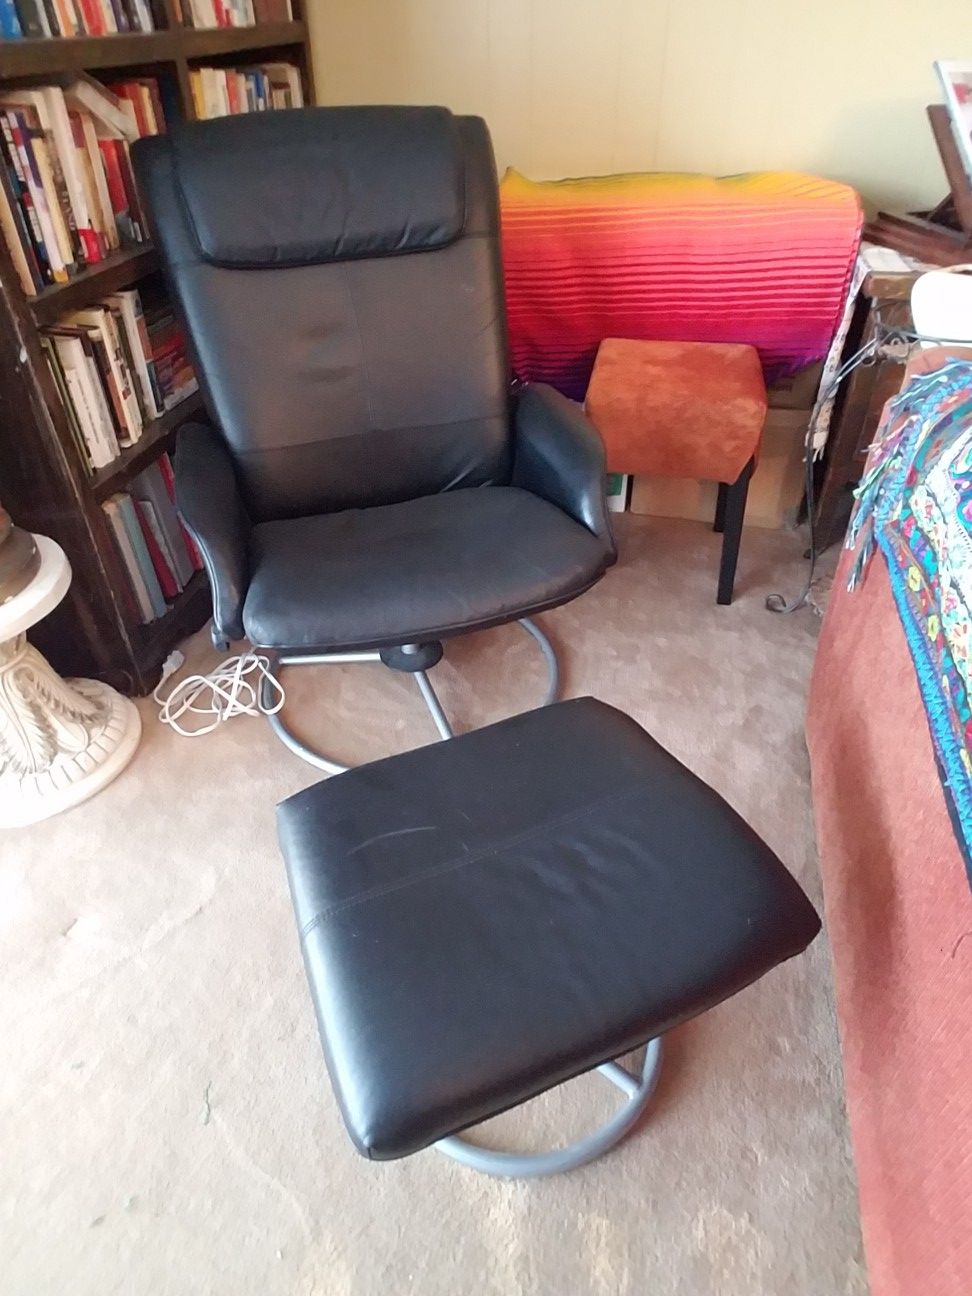 Ikea leather-look black chair and ottoman